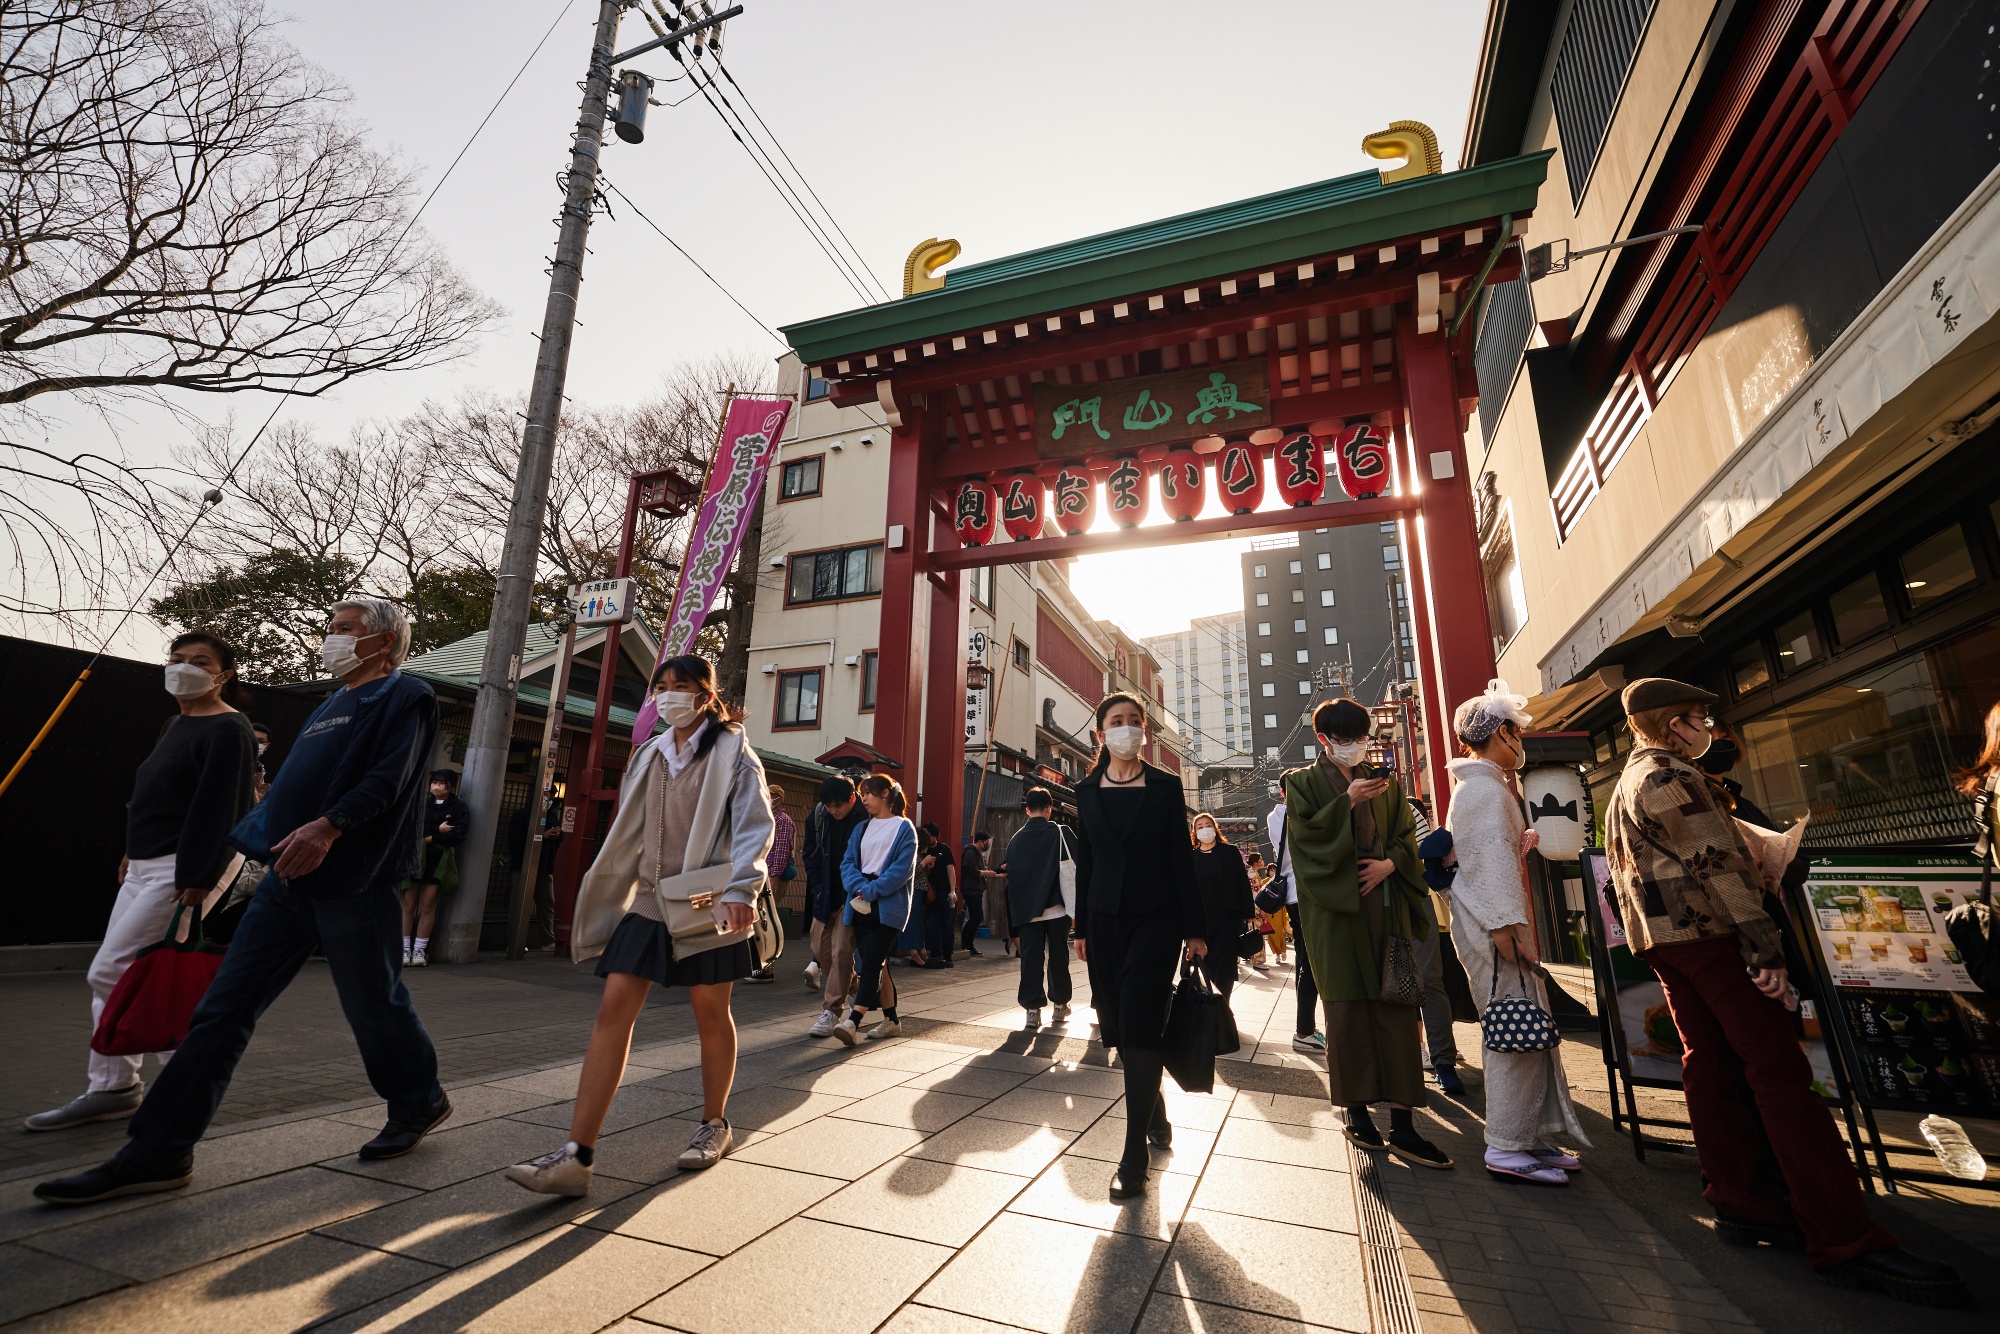 Japan relaxed entry for foreign tourists just last October, ending almost three years of tight border controls.